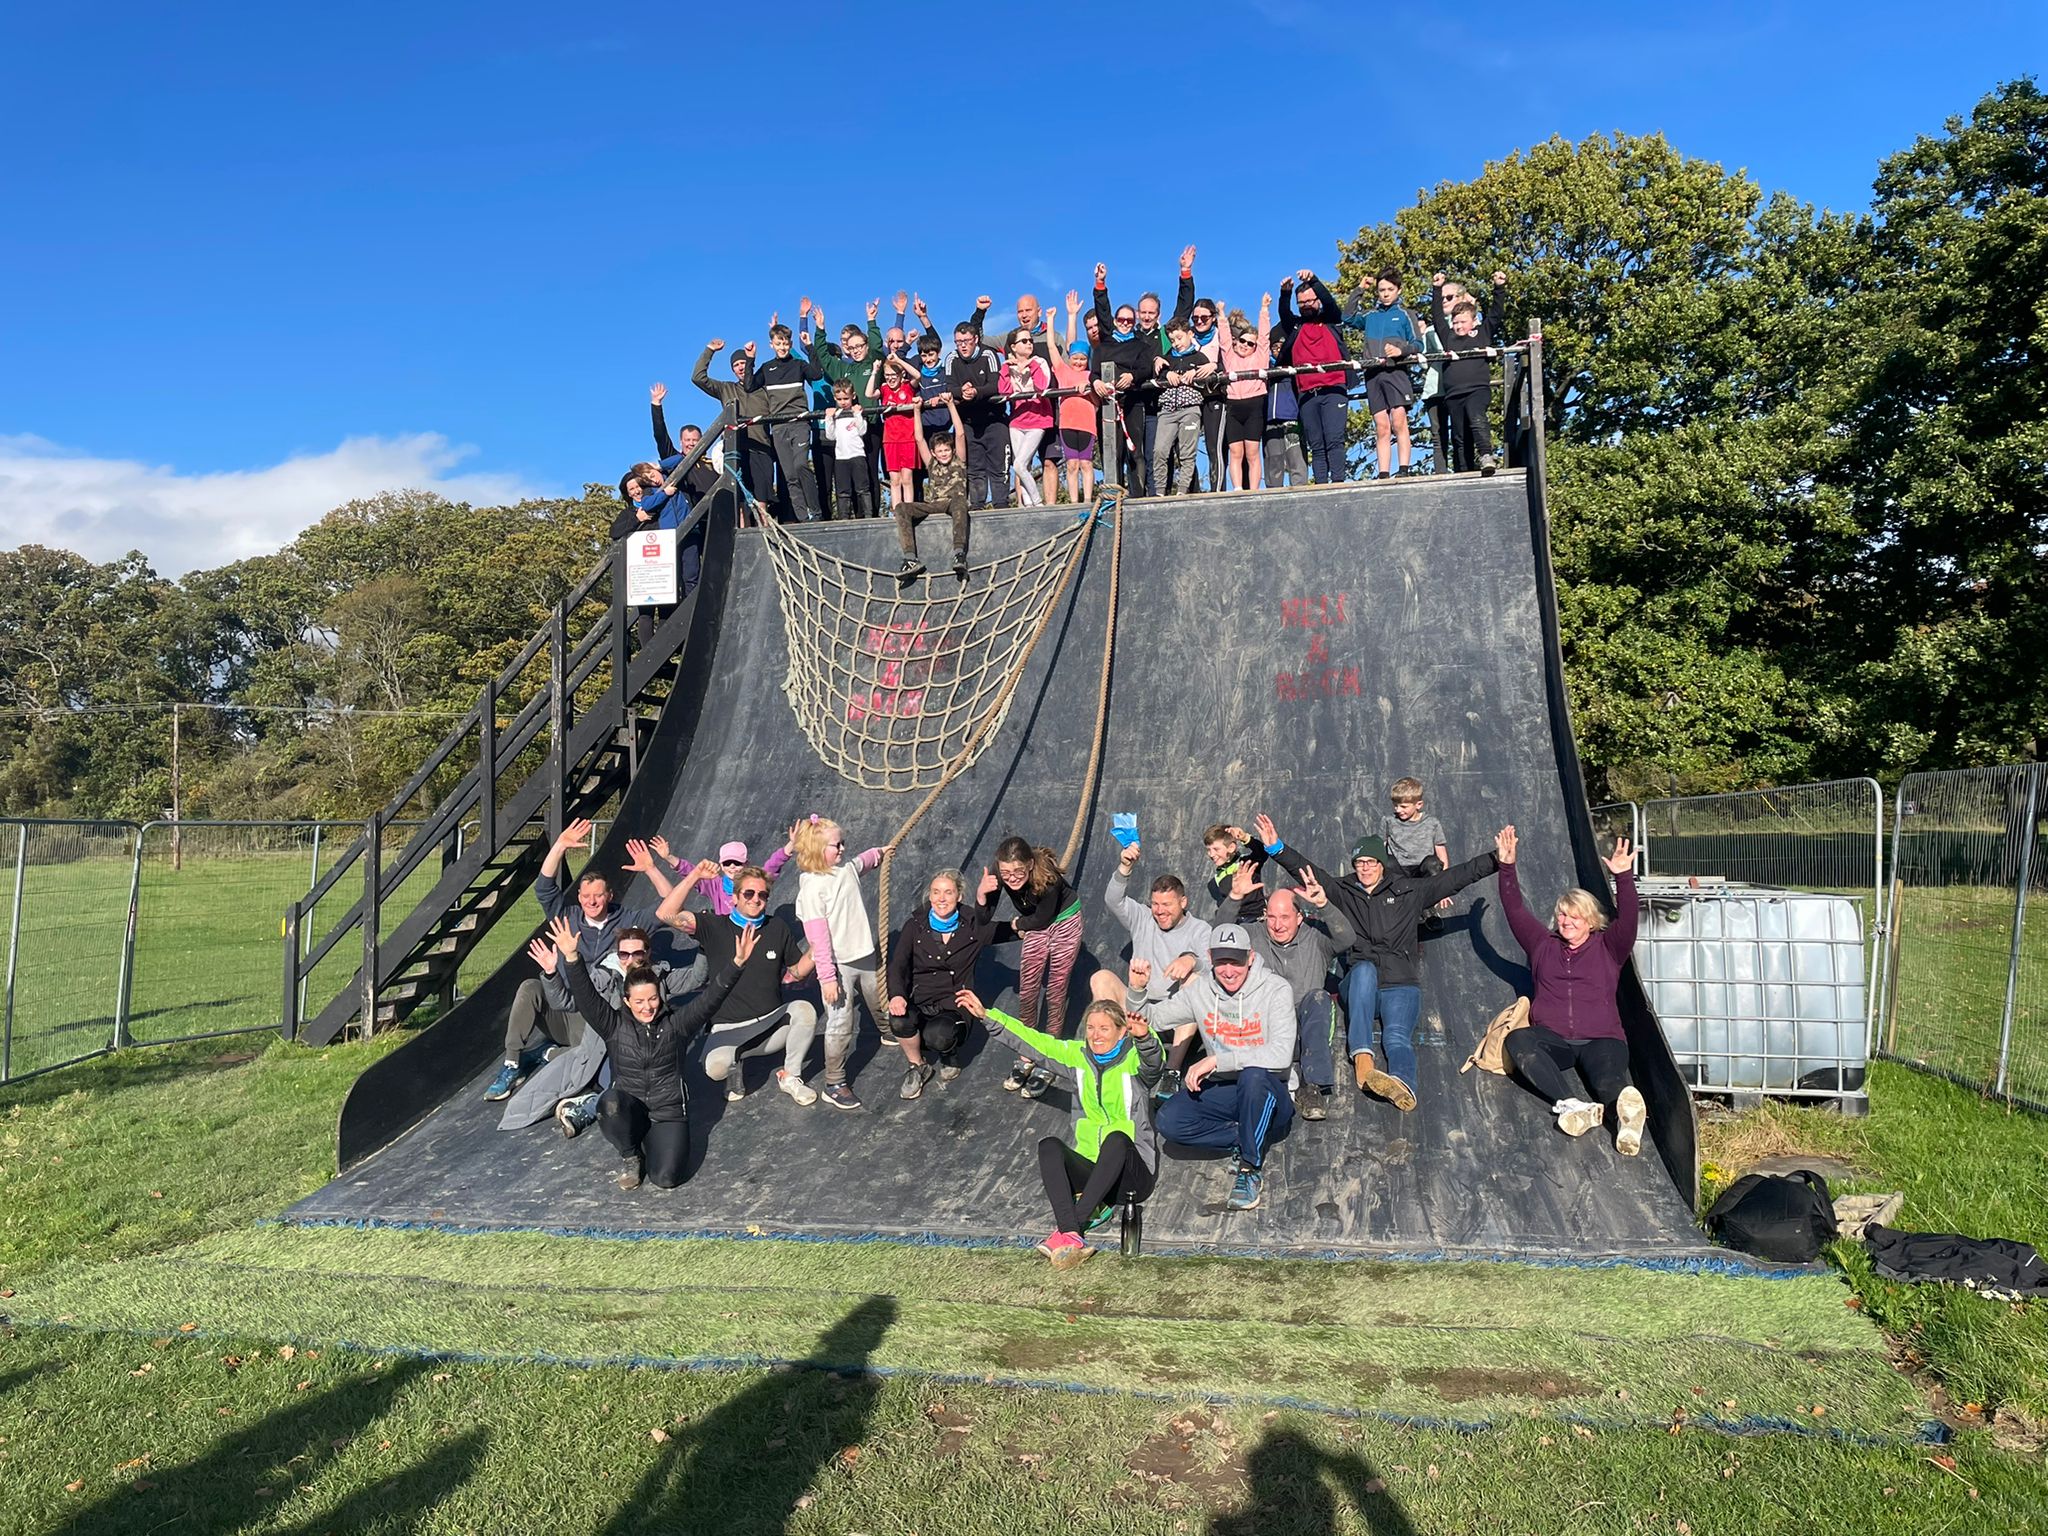 The entire group who took part in the Ireland's Fittest Family event pose for a picture as some members stand on the top of a ramp used in the obstacle course, while others sit at the bottom of the ramp.